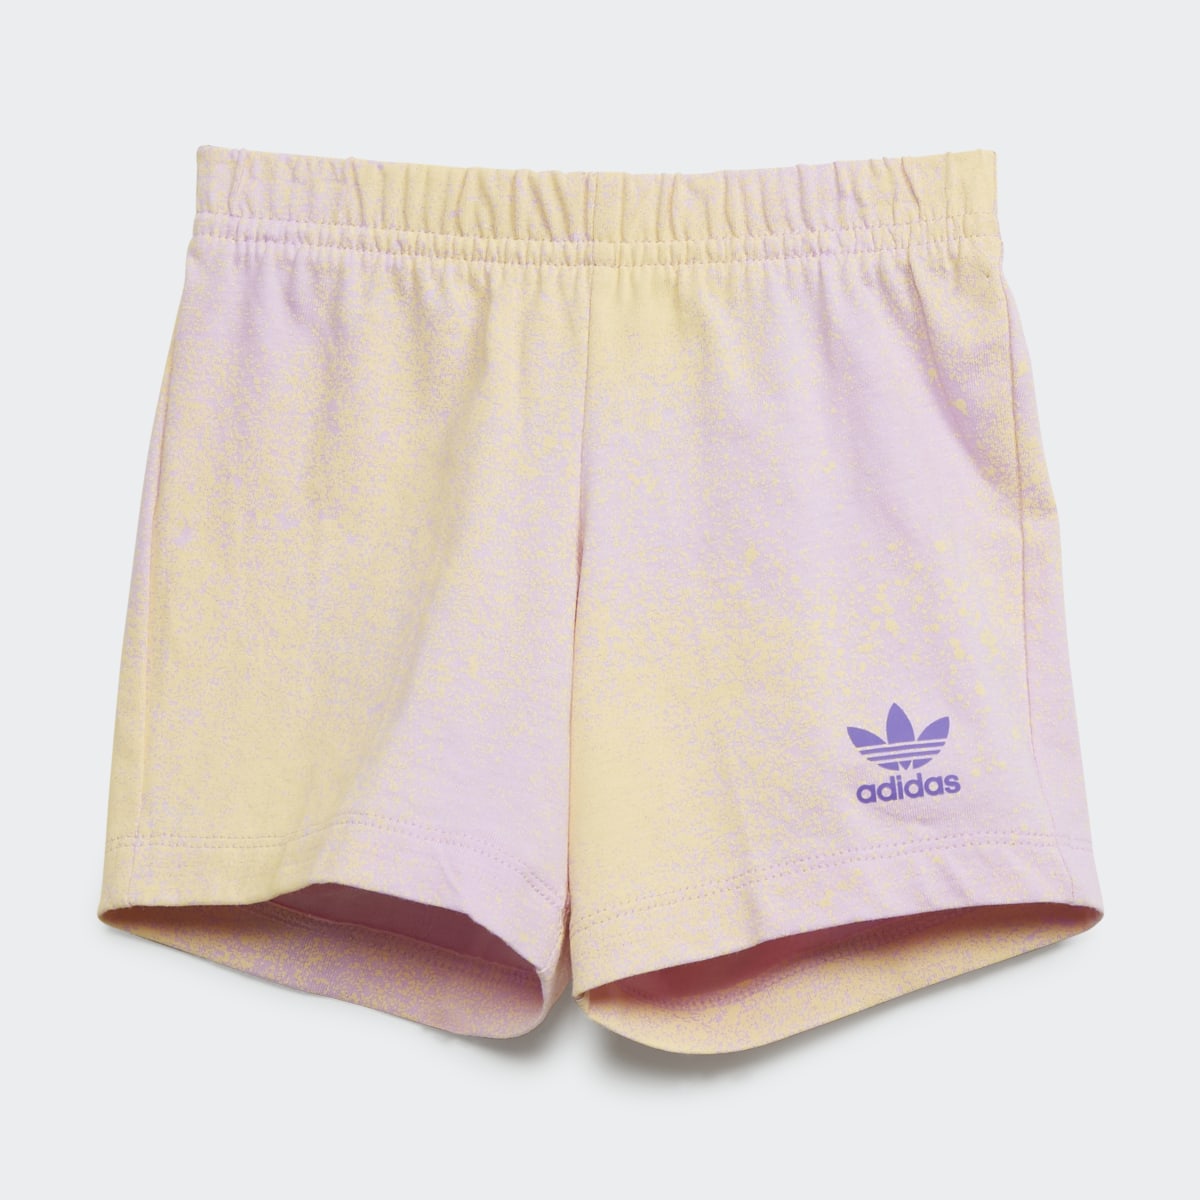 Adidas Completo Graphic Logo Shorts and Tee. 5